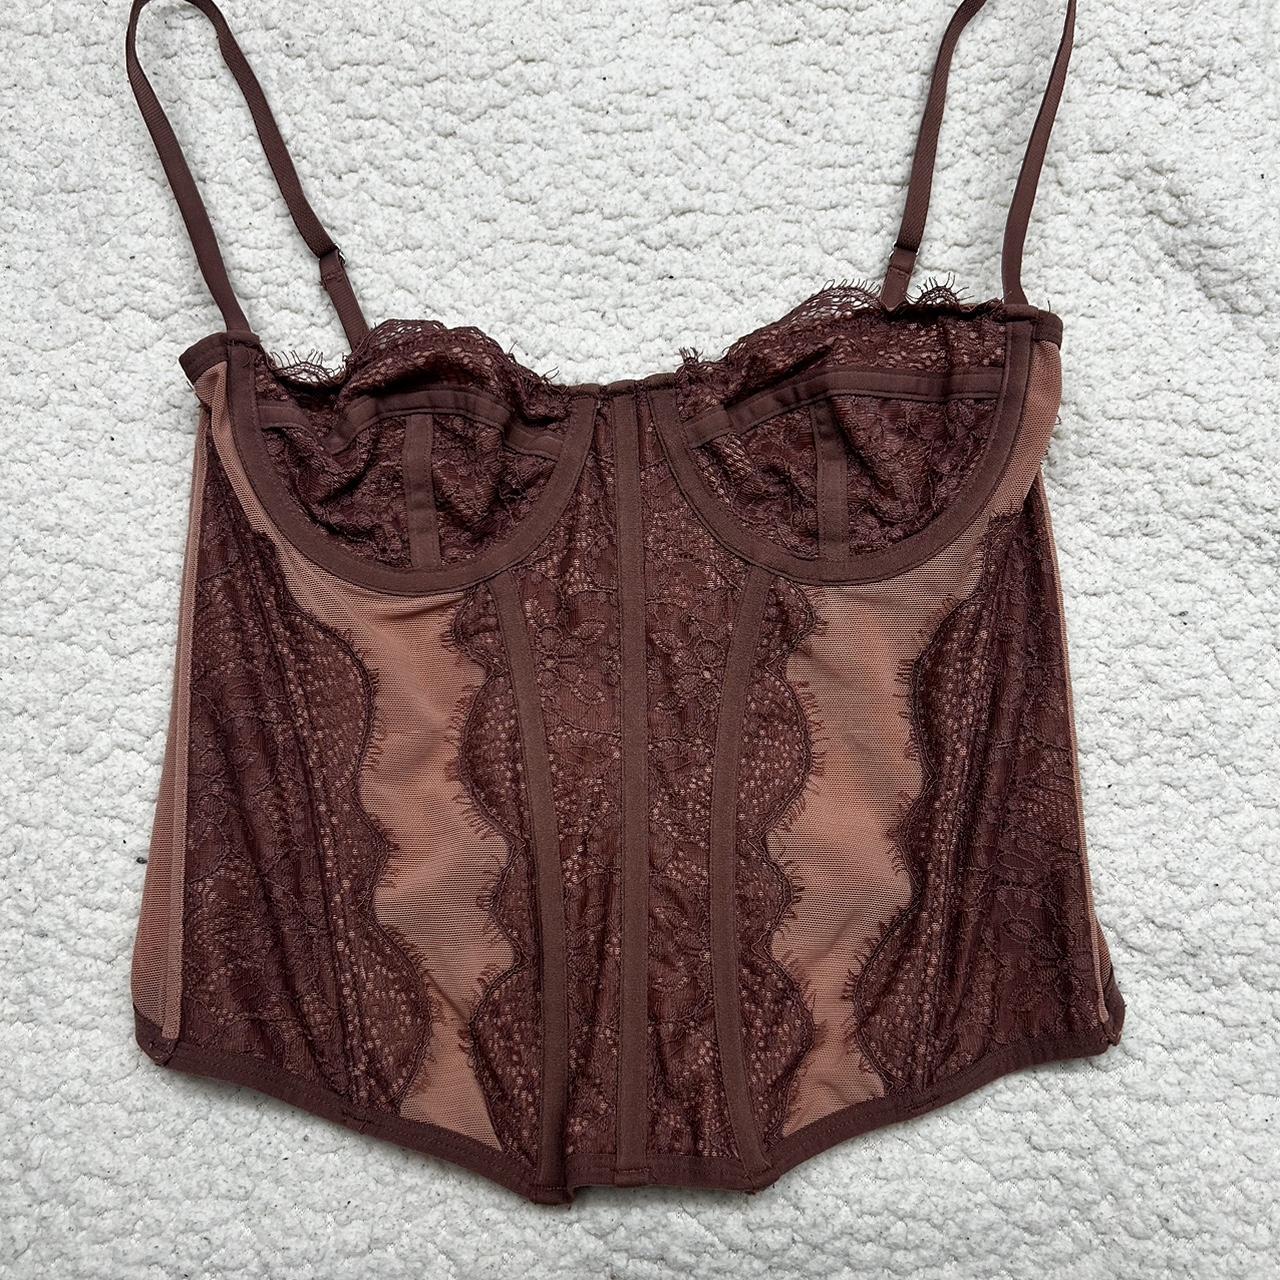 Urban outfitters out from under modern love corset - Depop